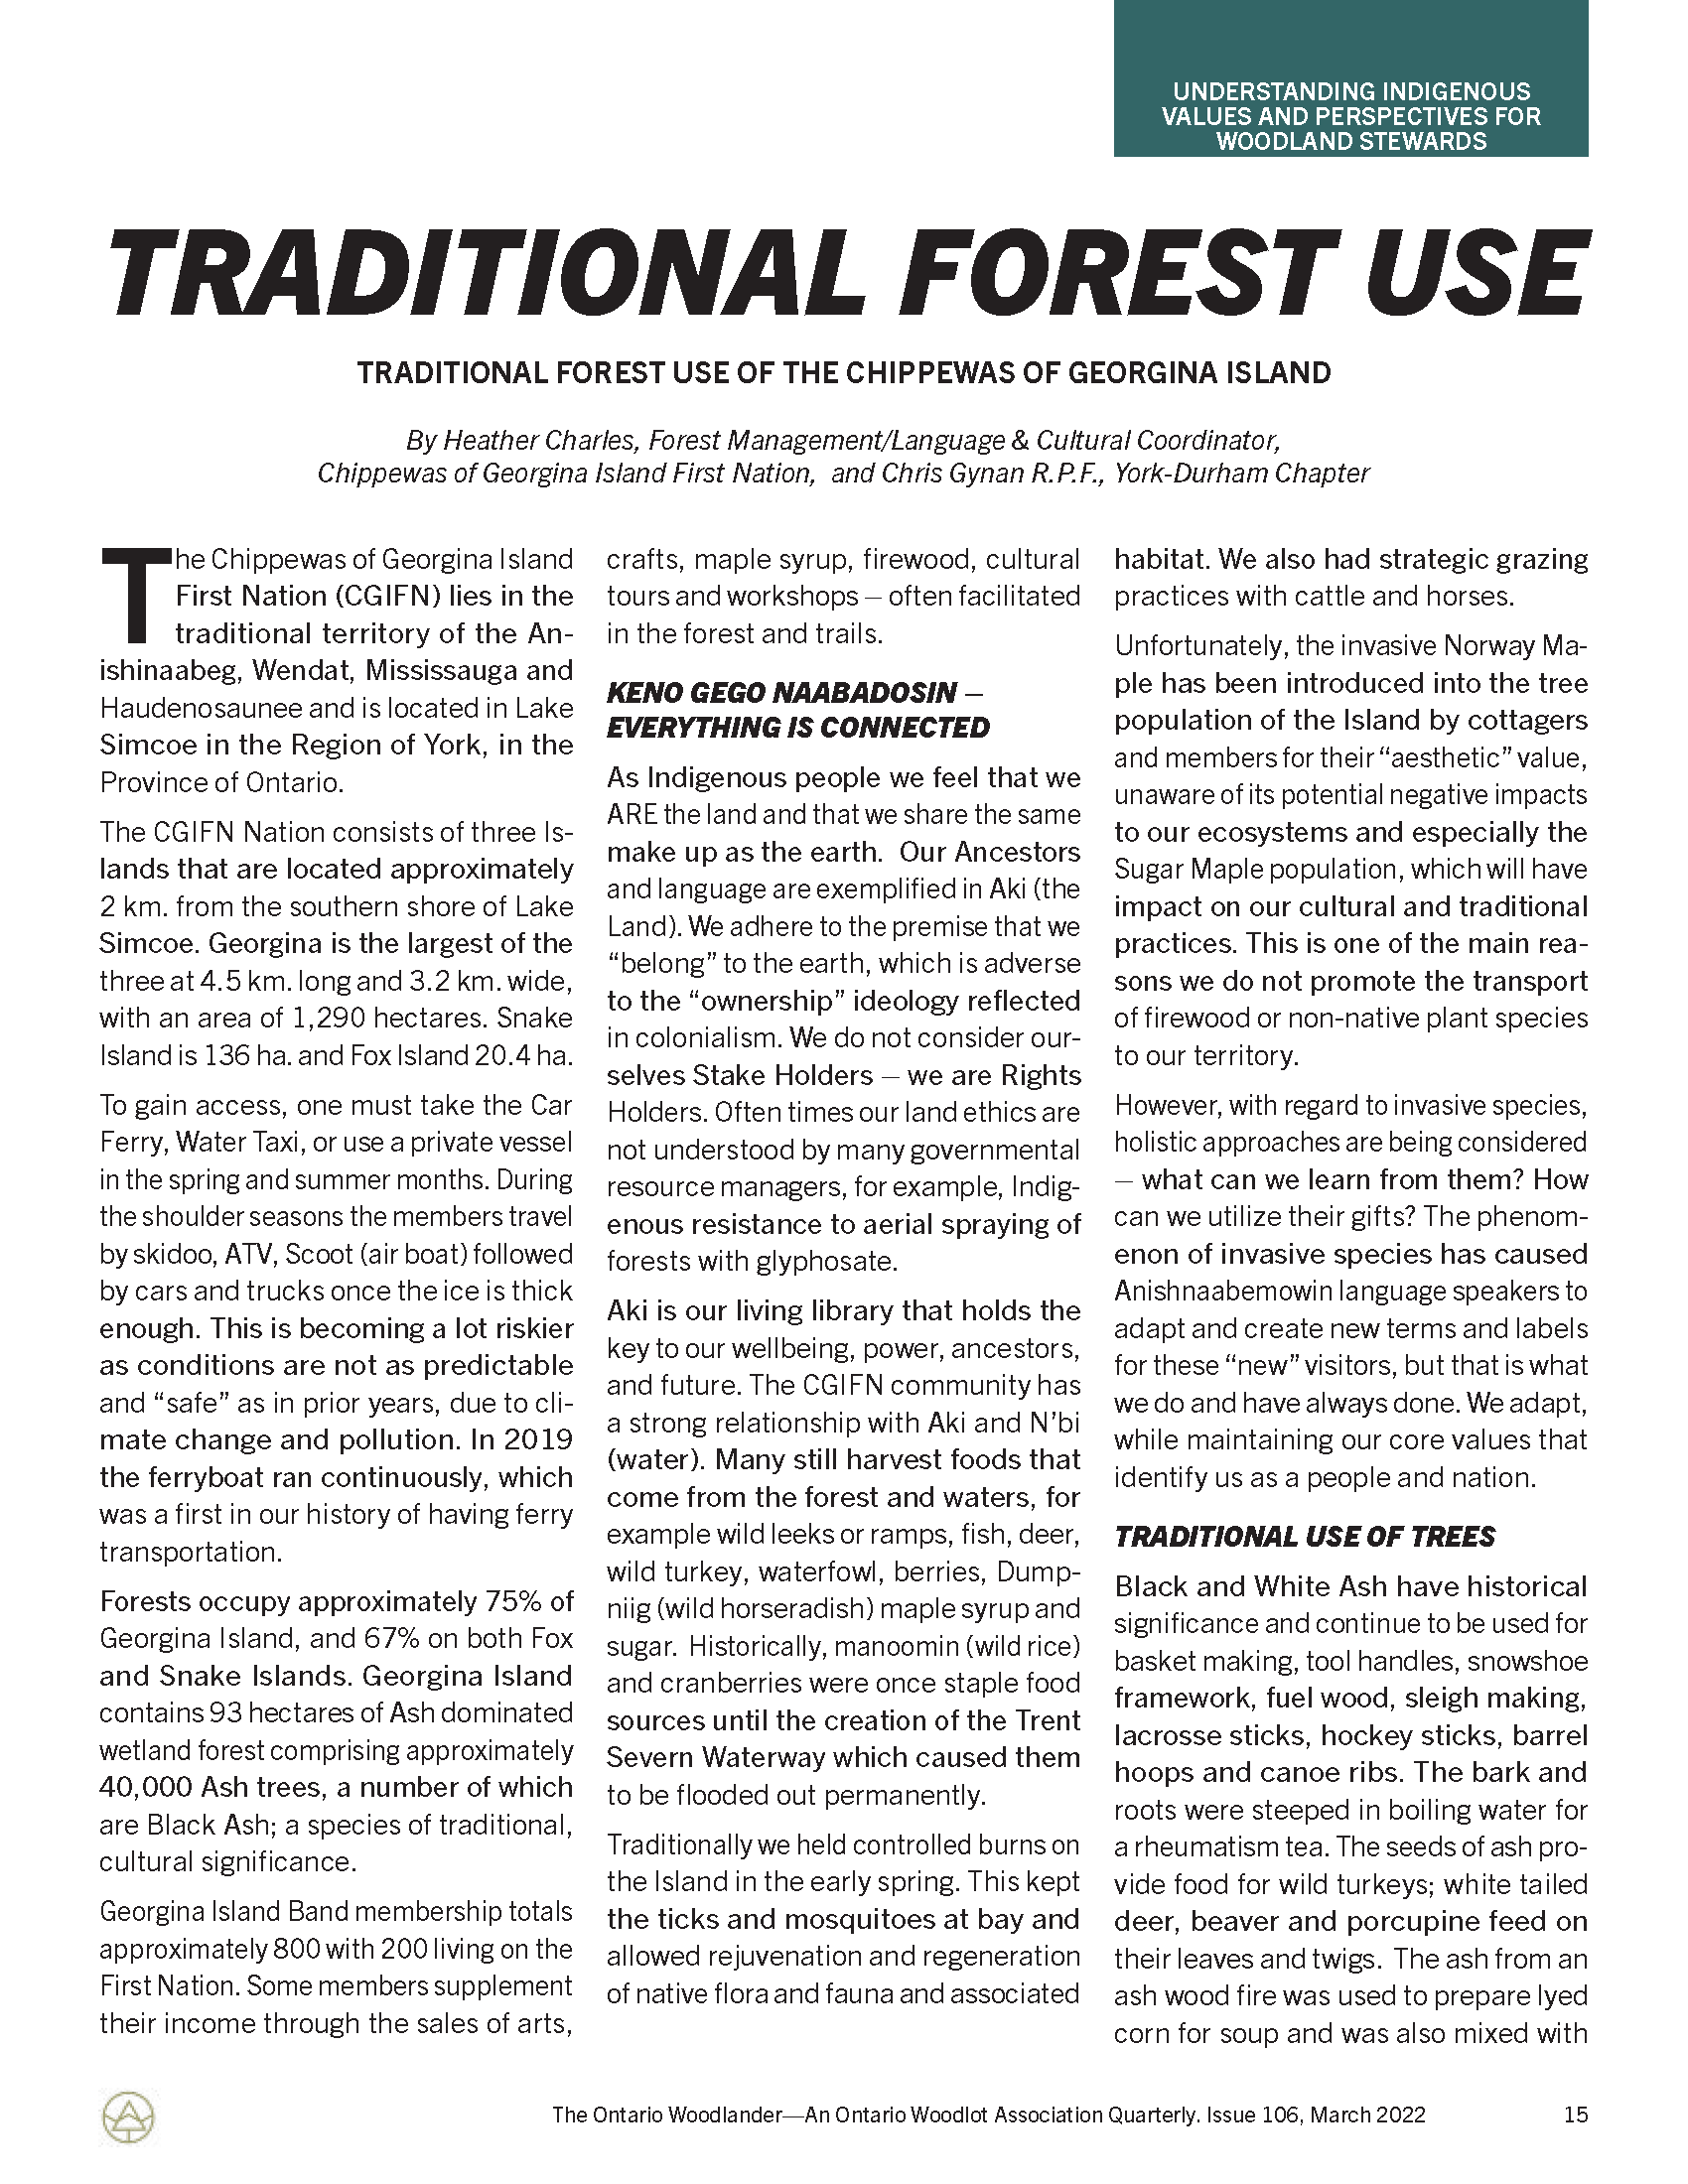 Page Ontario Woodlander Article March 2022 (2)_Page_15.png